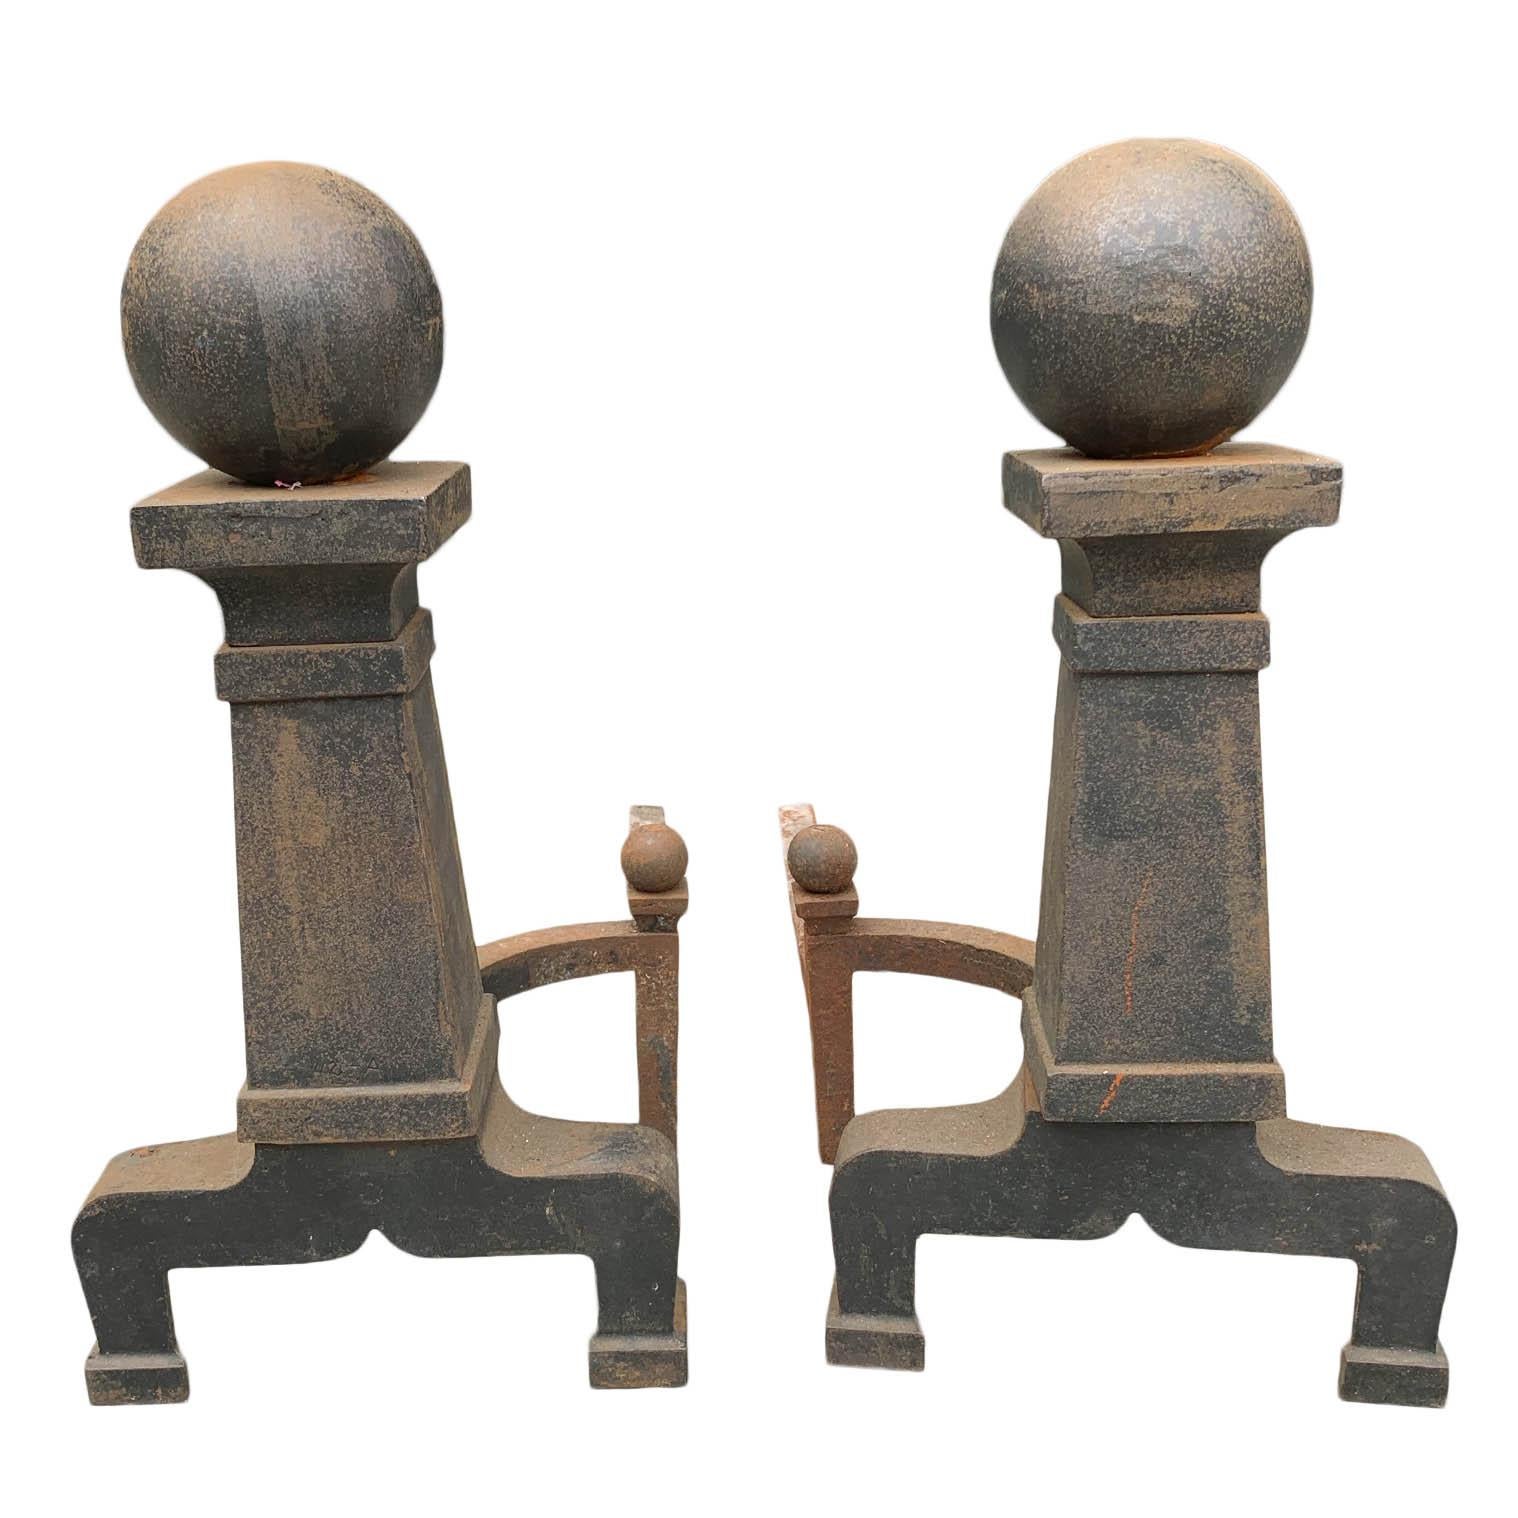 Andirons with welded cannonballs were made in the 19th century. They were big and impressive, measuring 10.5 inches wide, 22.5 inches long, and 20.5 inches tall.